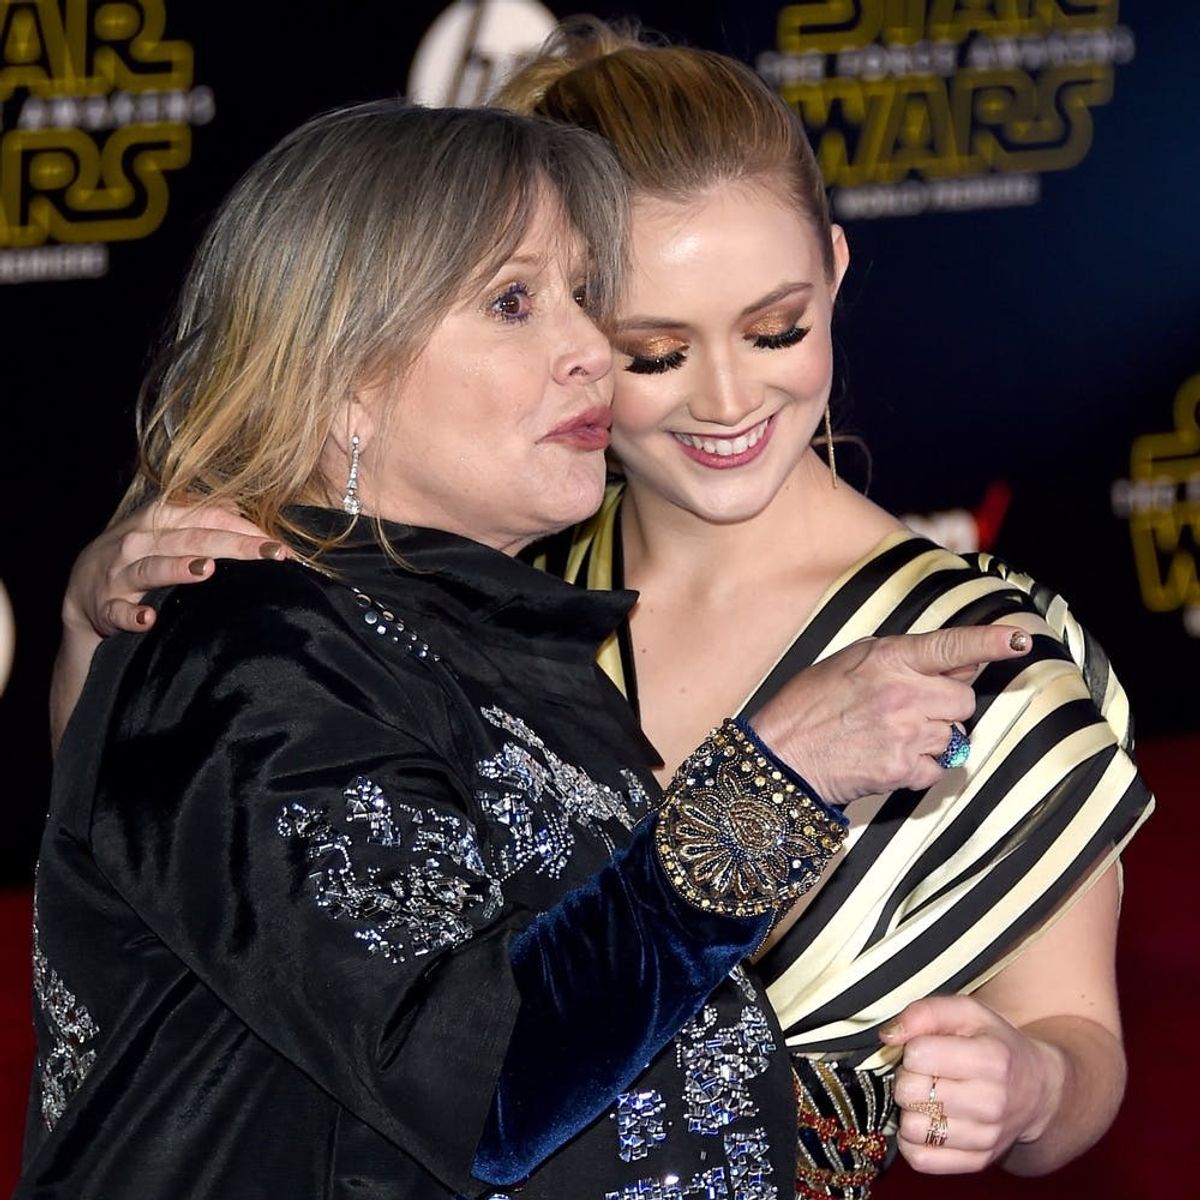 Billie Lourd Shared a Touching Tribute to Mom Carrie Fisher for “Star Wars: The Last Jedi”